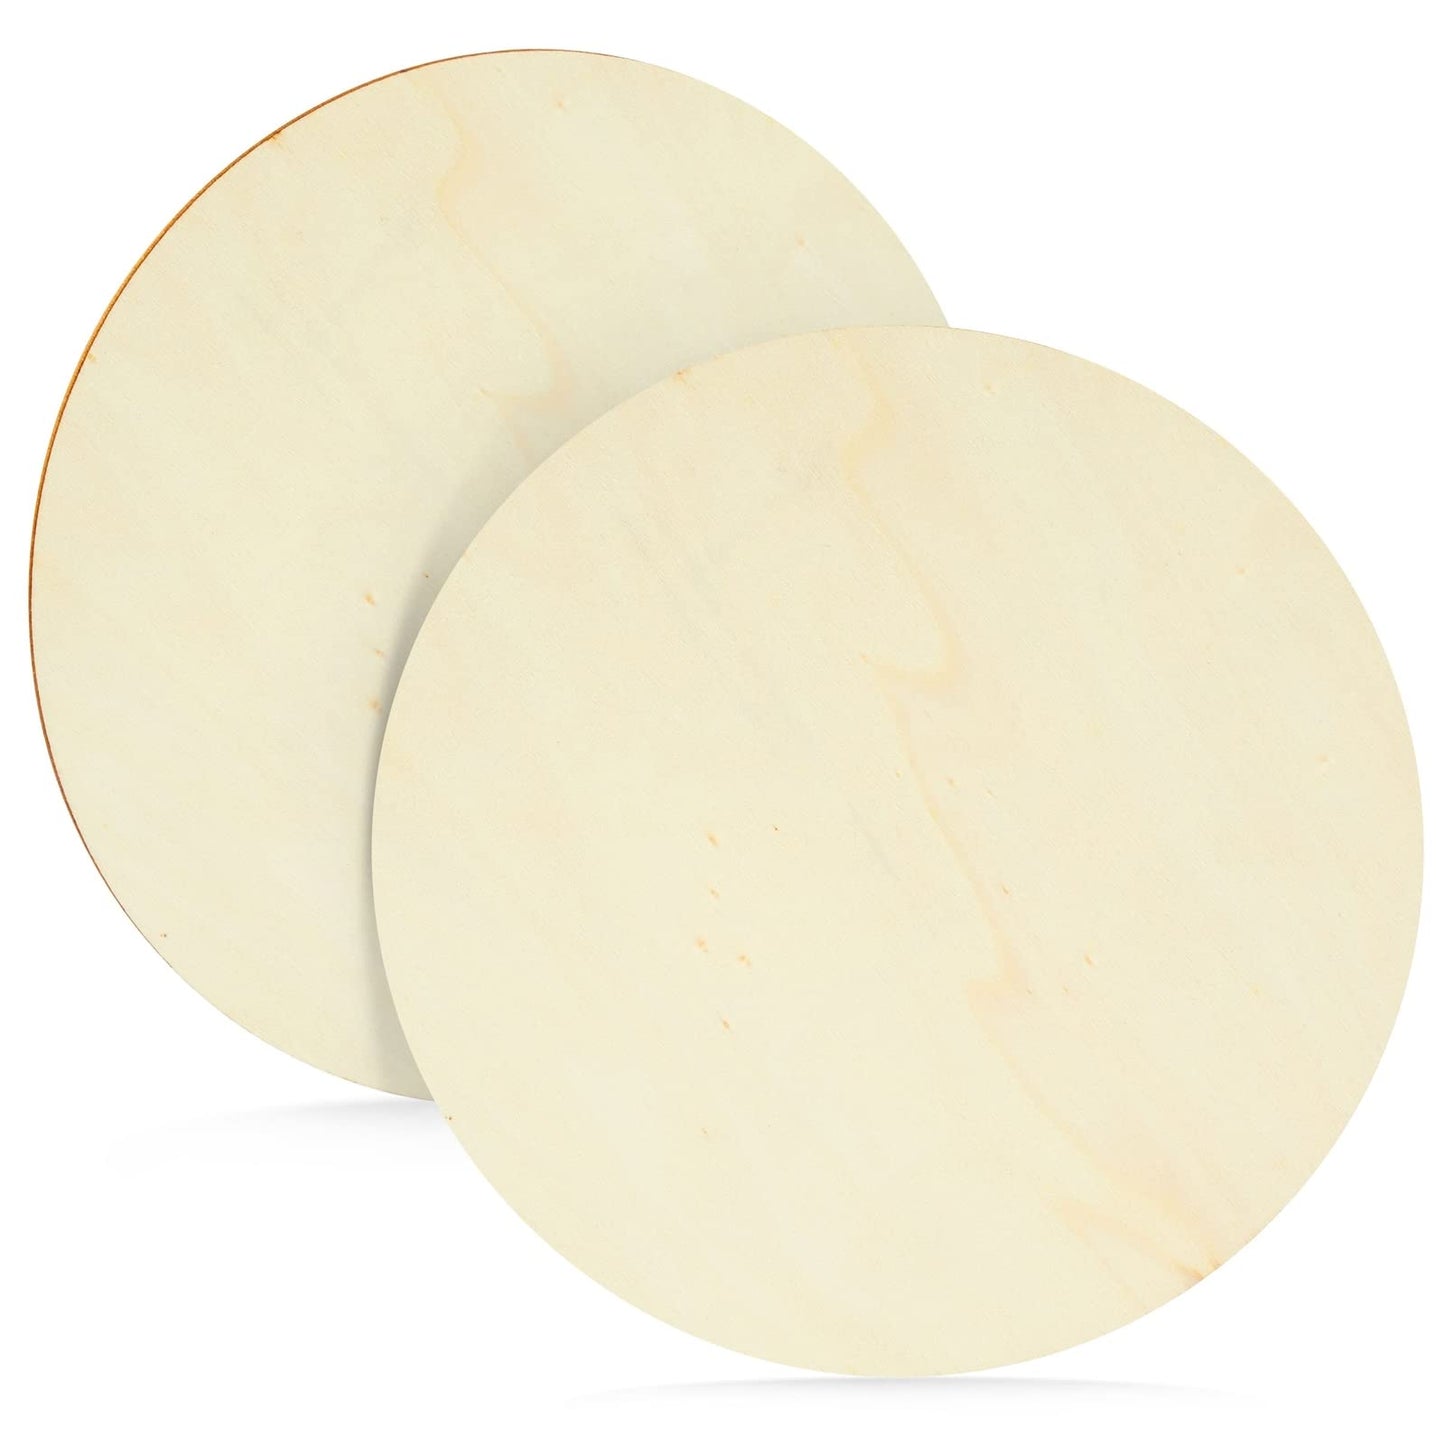 Juvale 12 Pack 6 Inch Unfinished Wood Circles for Crafts, Blank Cutout Slices for Wood Burning, Engraving, Round Wooden Discs for DIY Coasters, Art